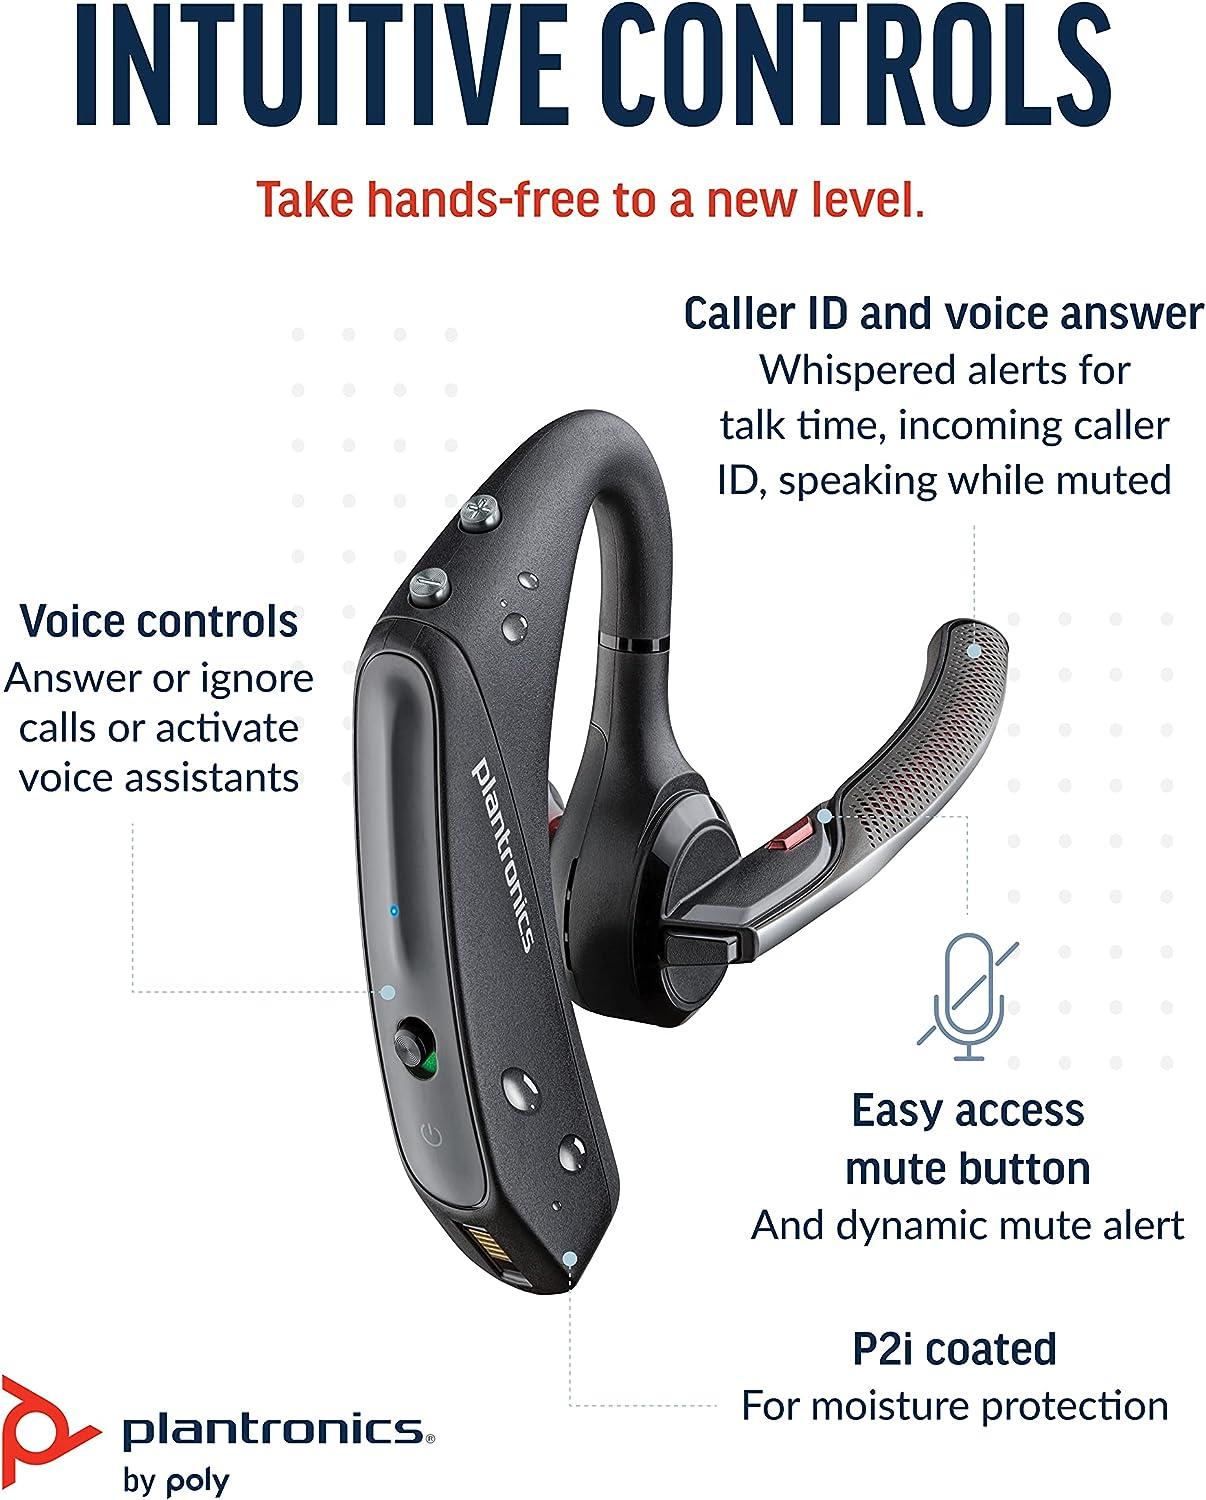 Poly Voyager 5200 UC Wireless Headset & Charging Case (Plantronics) -  Single-Ear Bluetooth Headset w/Noise-Canceling Mic - Connect Mobile/Mac/PC  via Bluetooth - Works w/Teams, Zoom - Amazon Exclusive